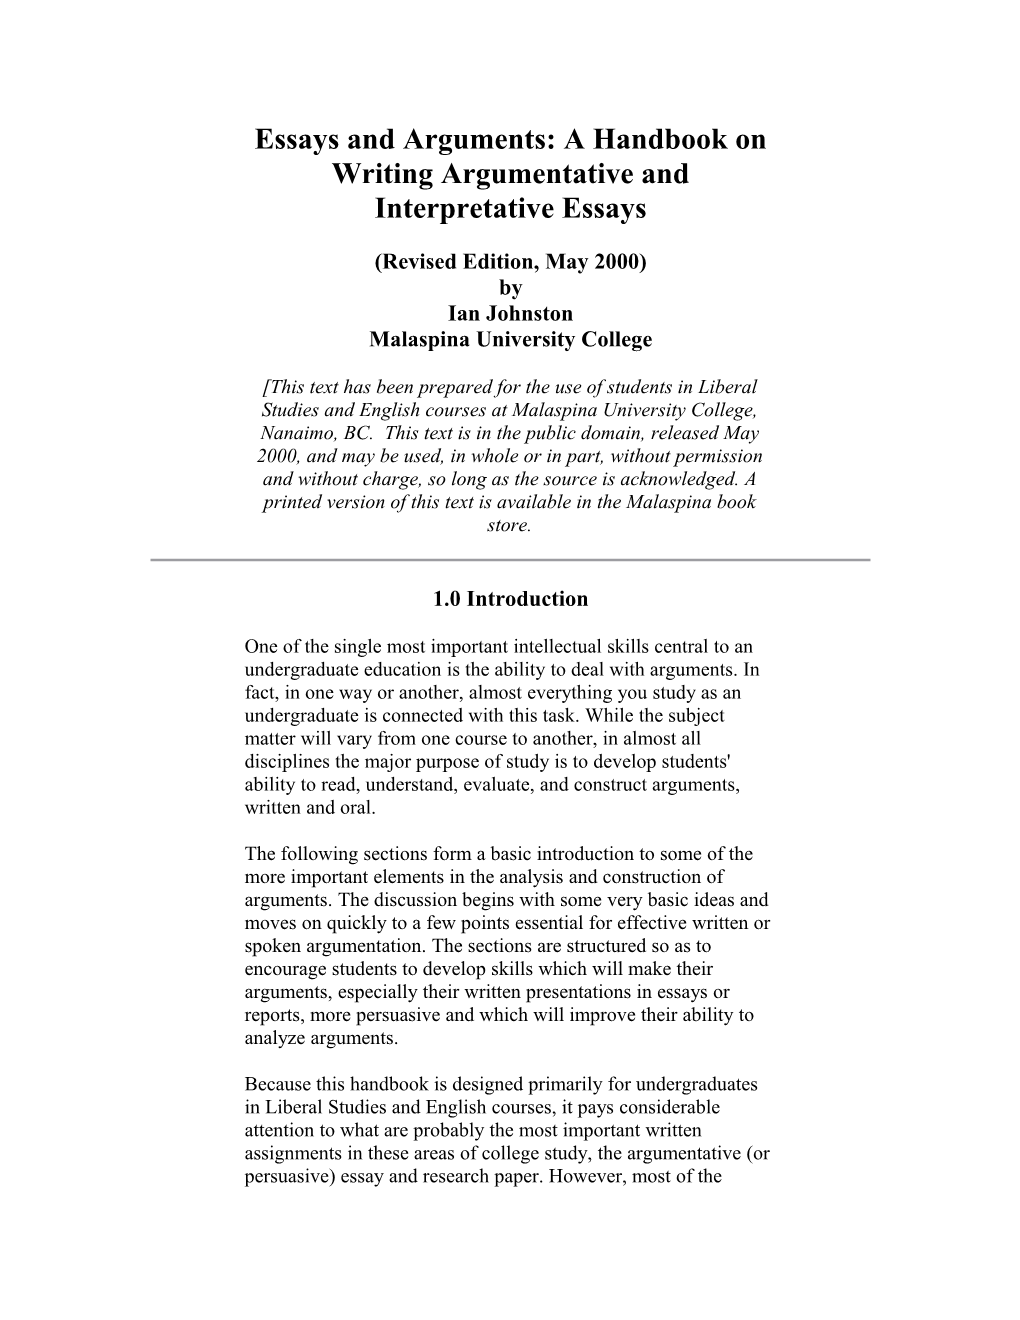 Essays and Arguments, Section Two